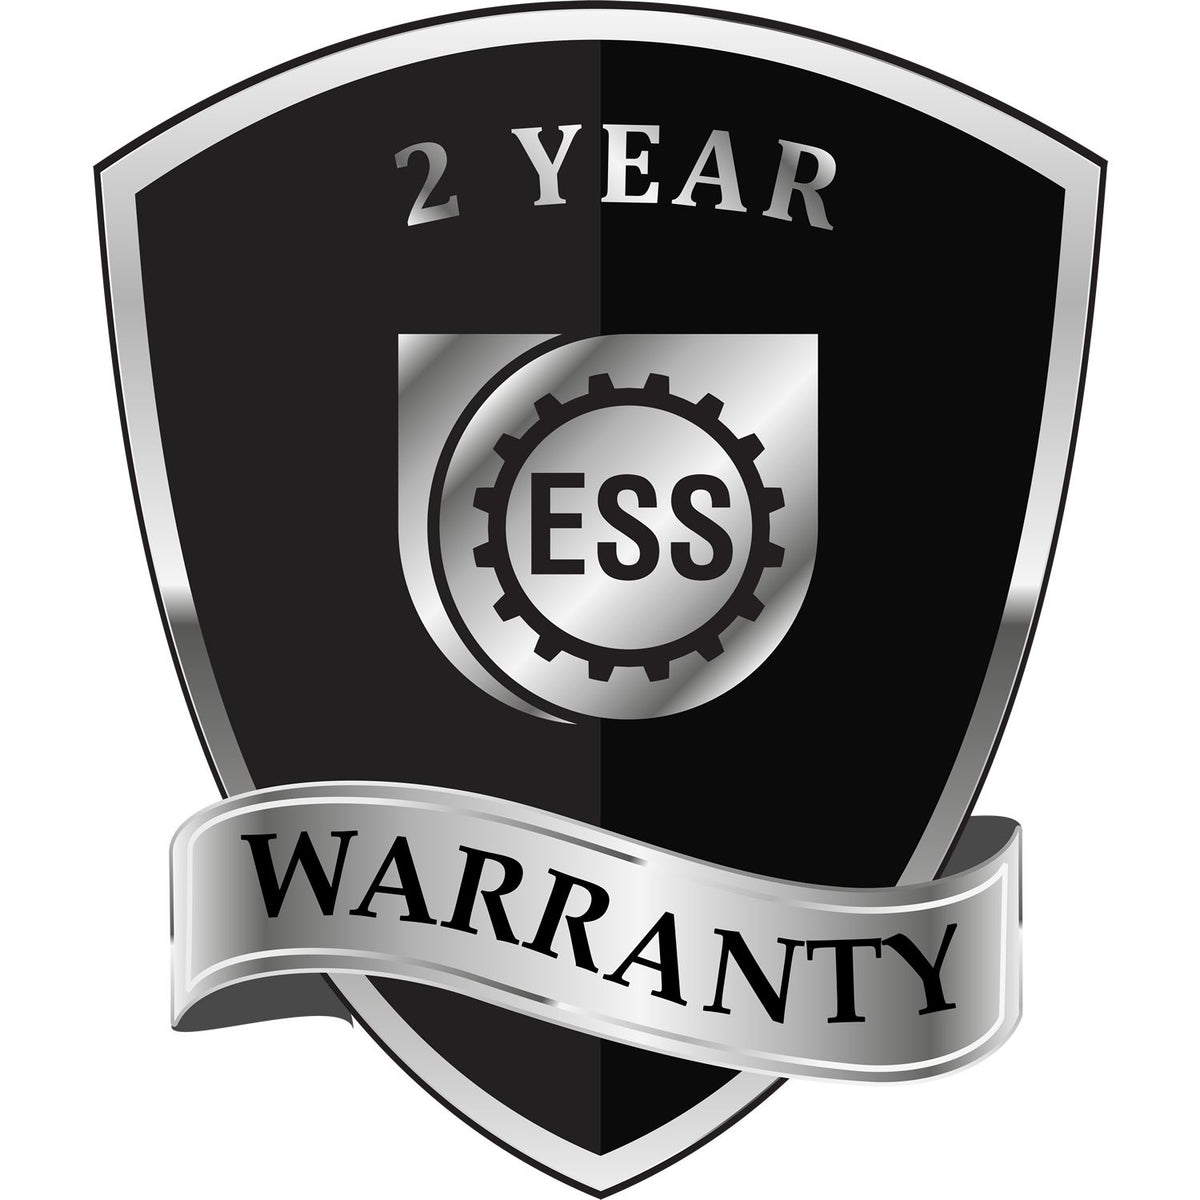 A black and silver badge or emblem showing warranty information for the Hybrid Missouri Geologist Seal